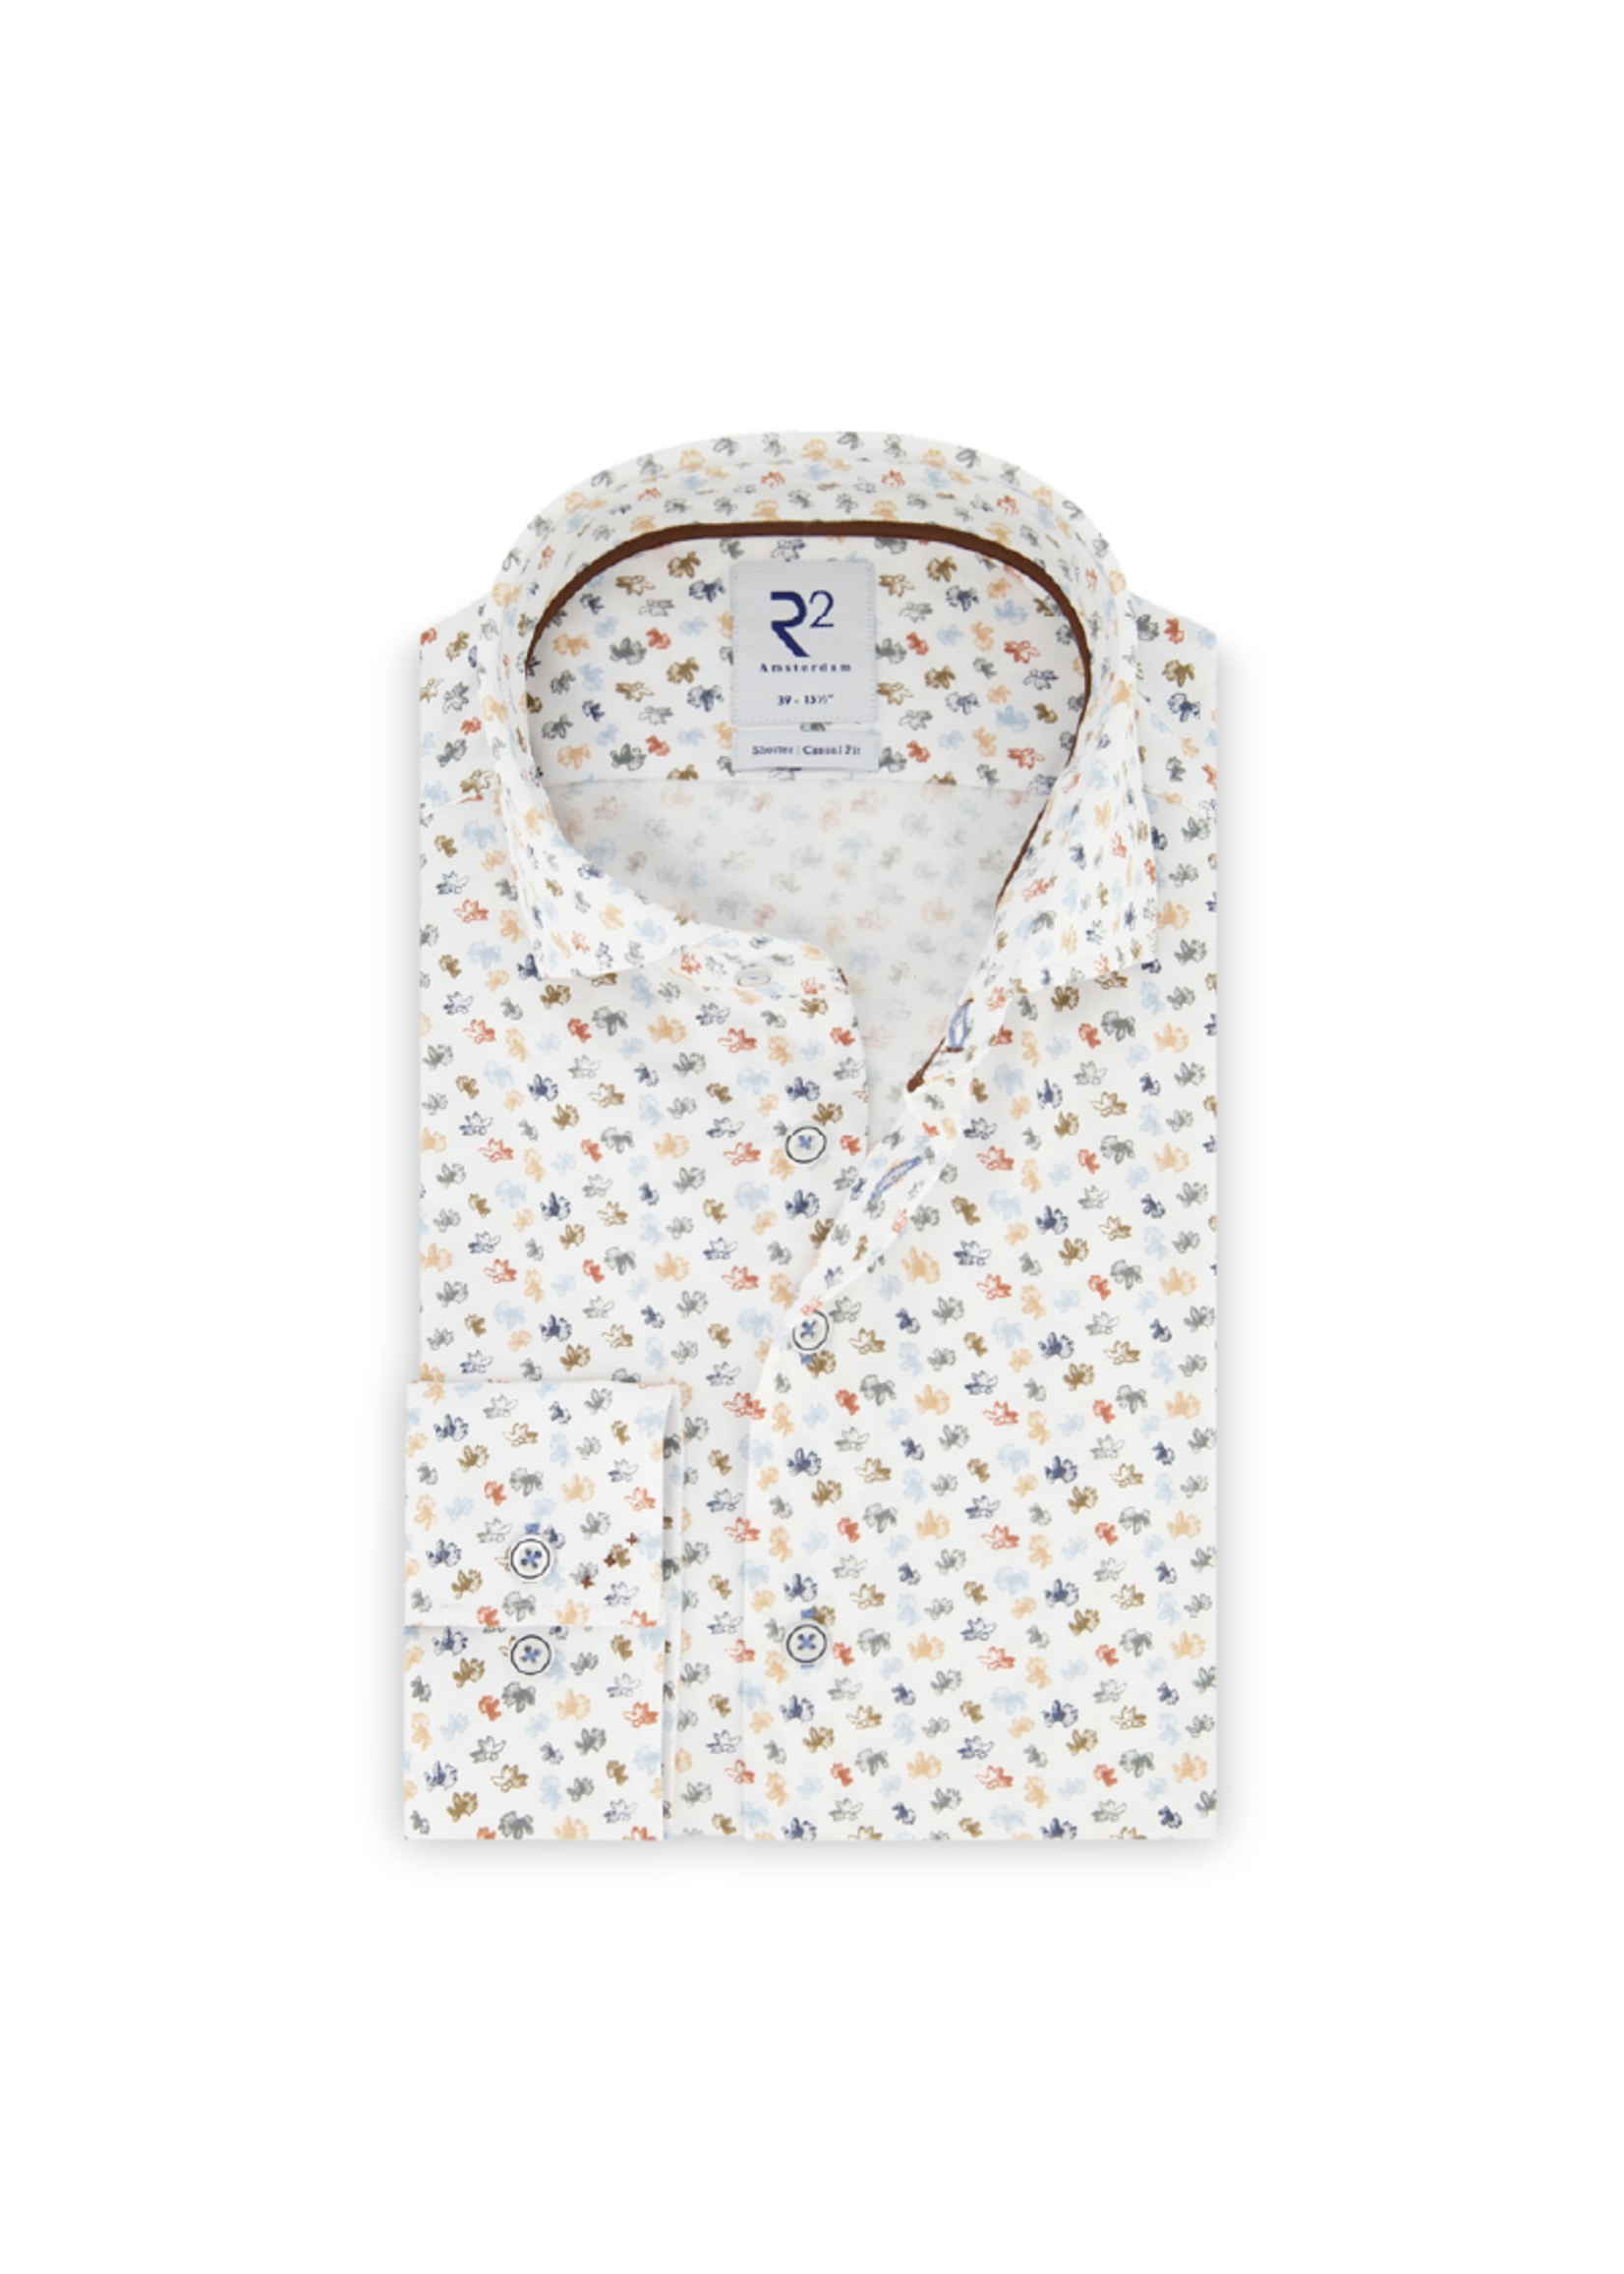 R2 Amsterdam Small Print Button-Up